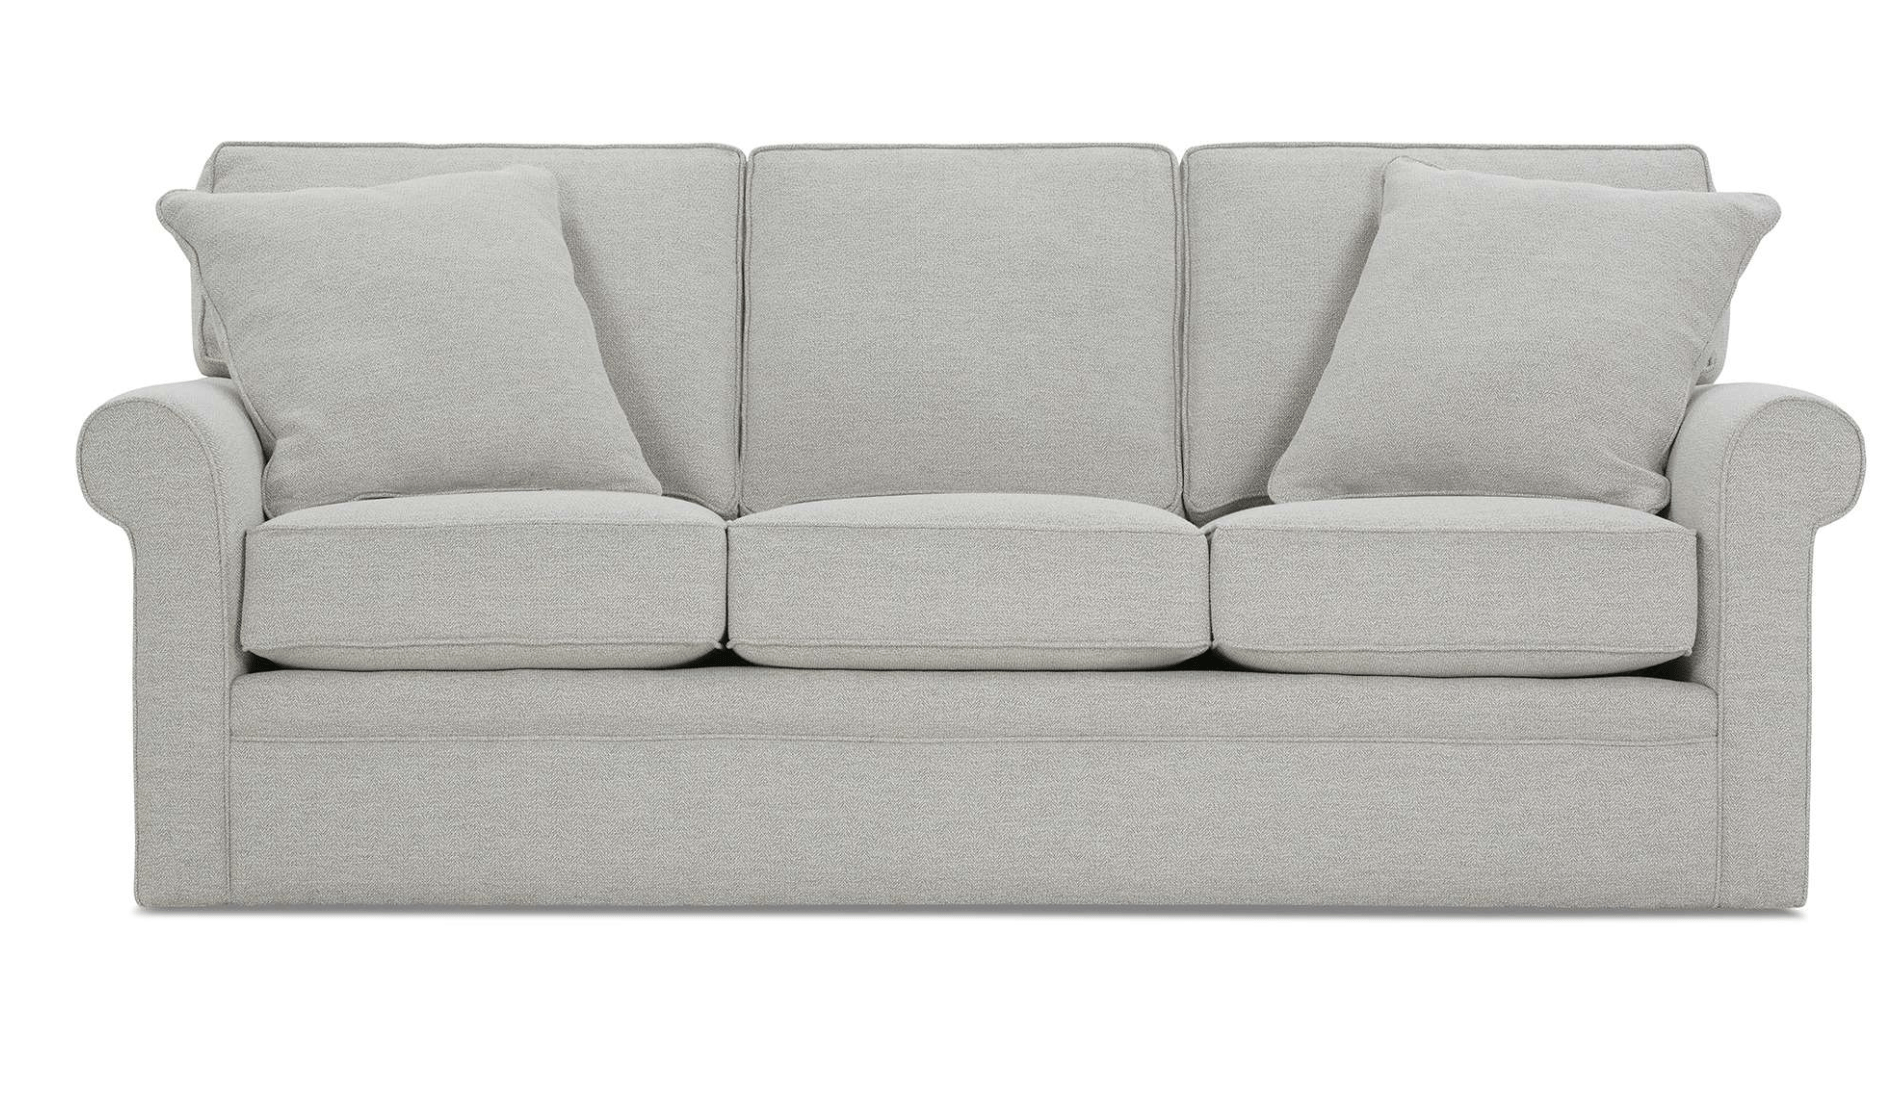 a grey couch with three pillows on a white background .